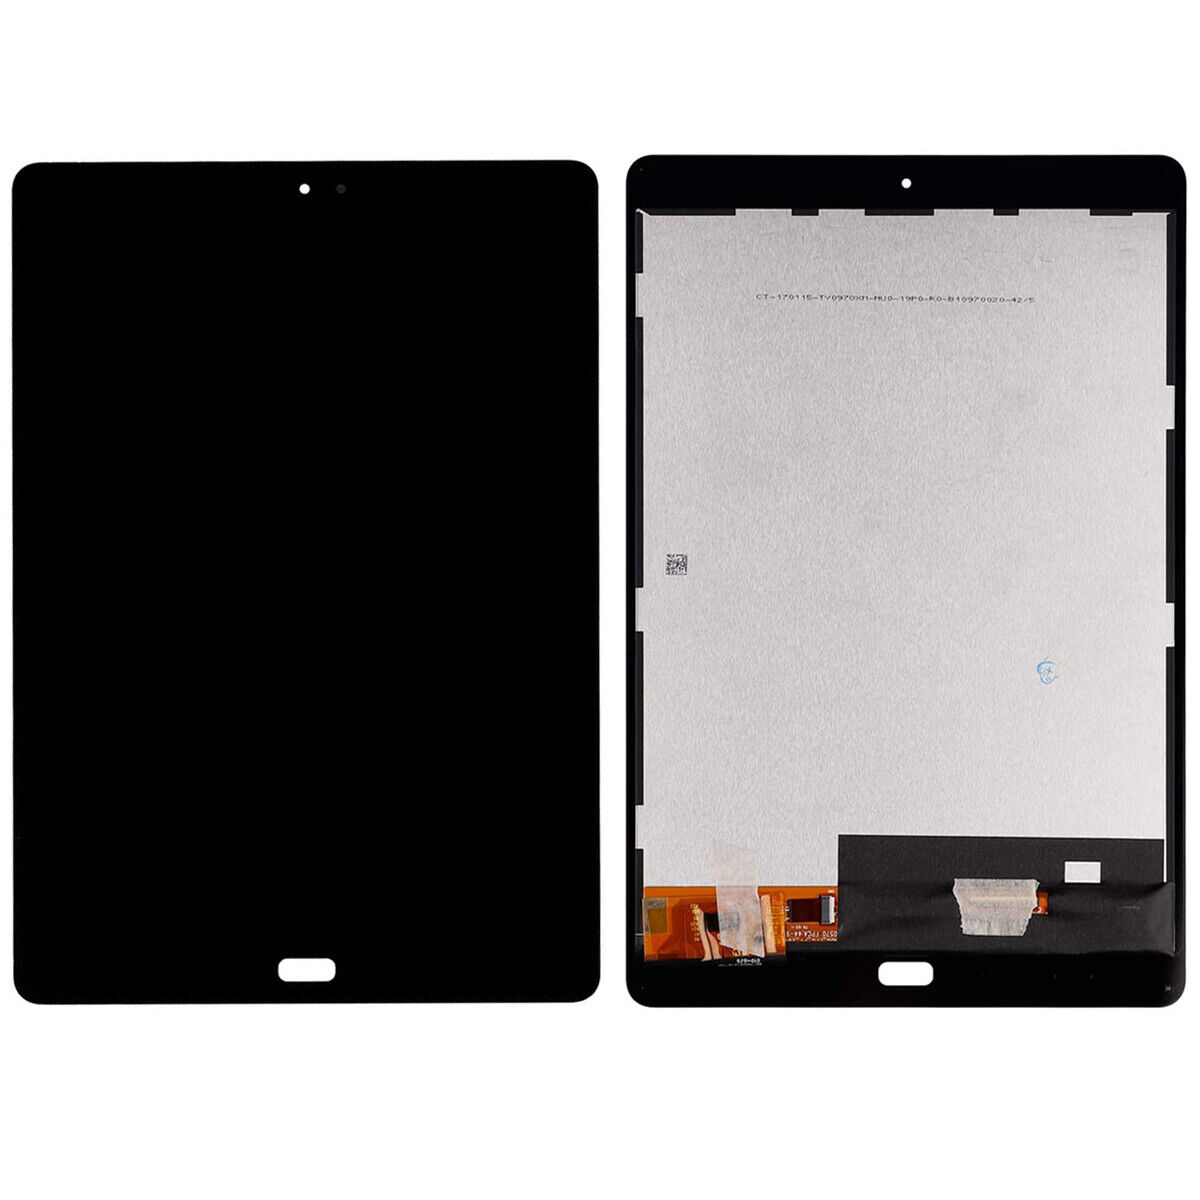 LCD Display Touch Screen Digitizer Assembly For Asus ZenPad 3S 10 WiFi (Z500M)